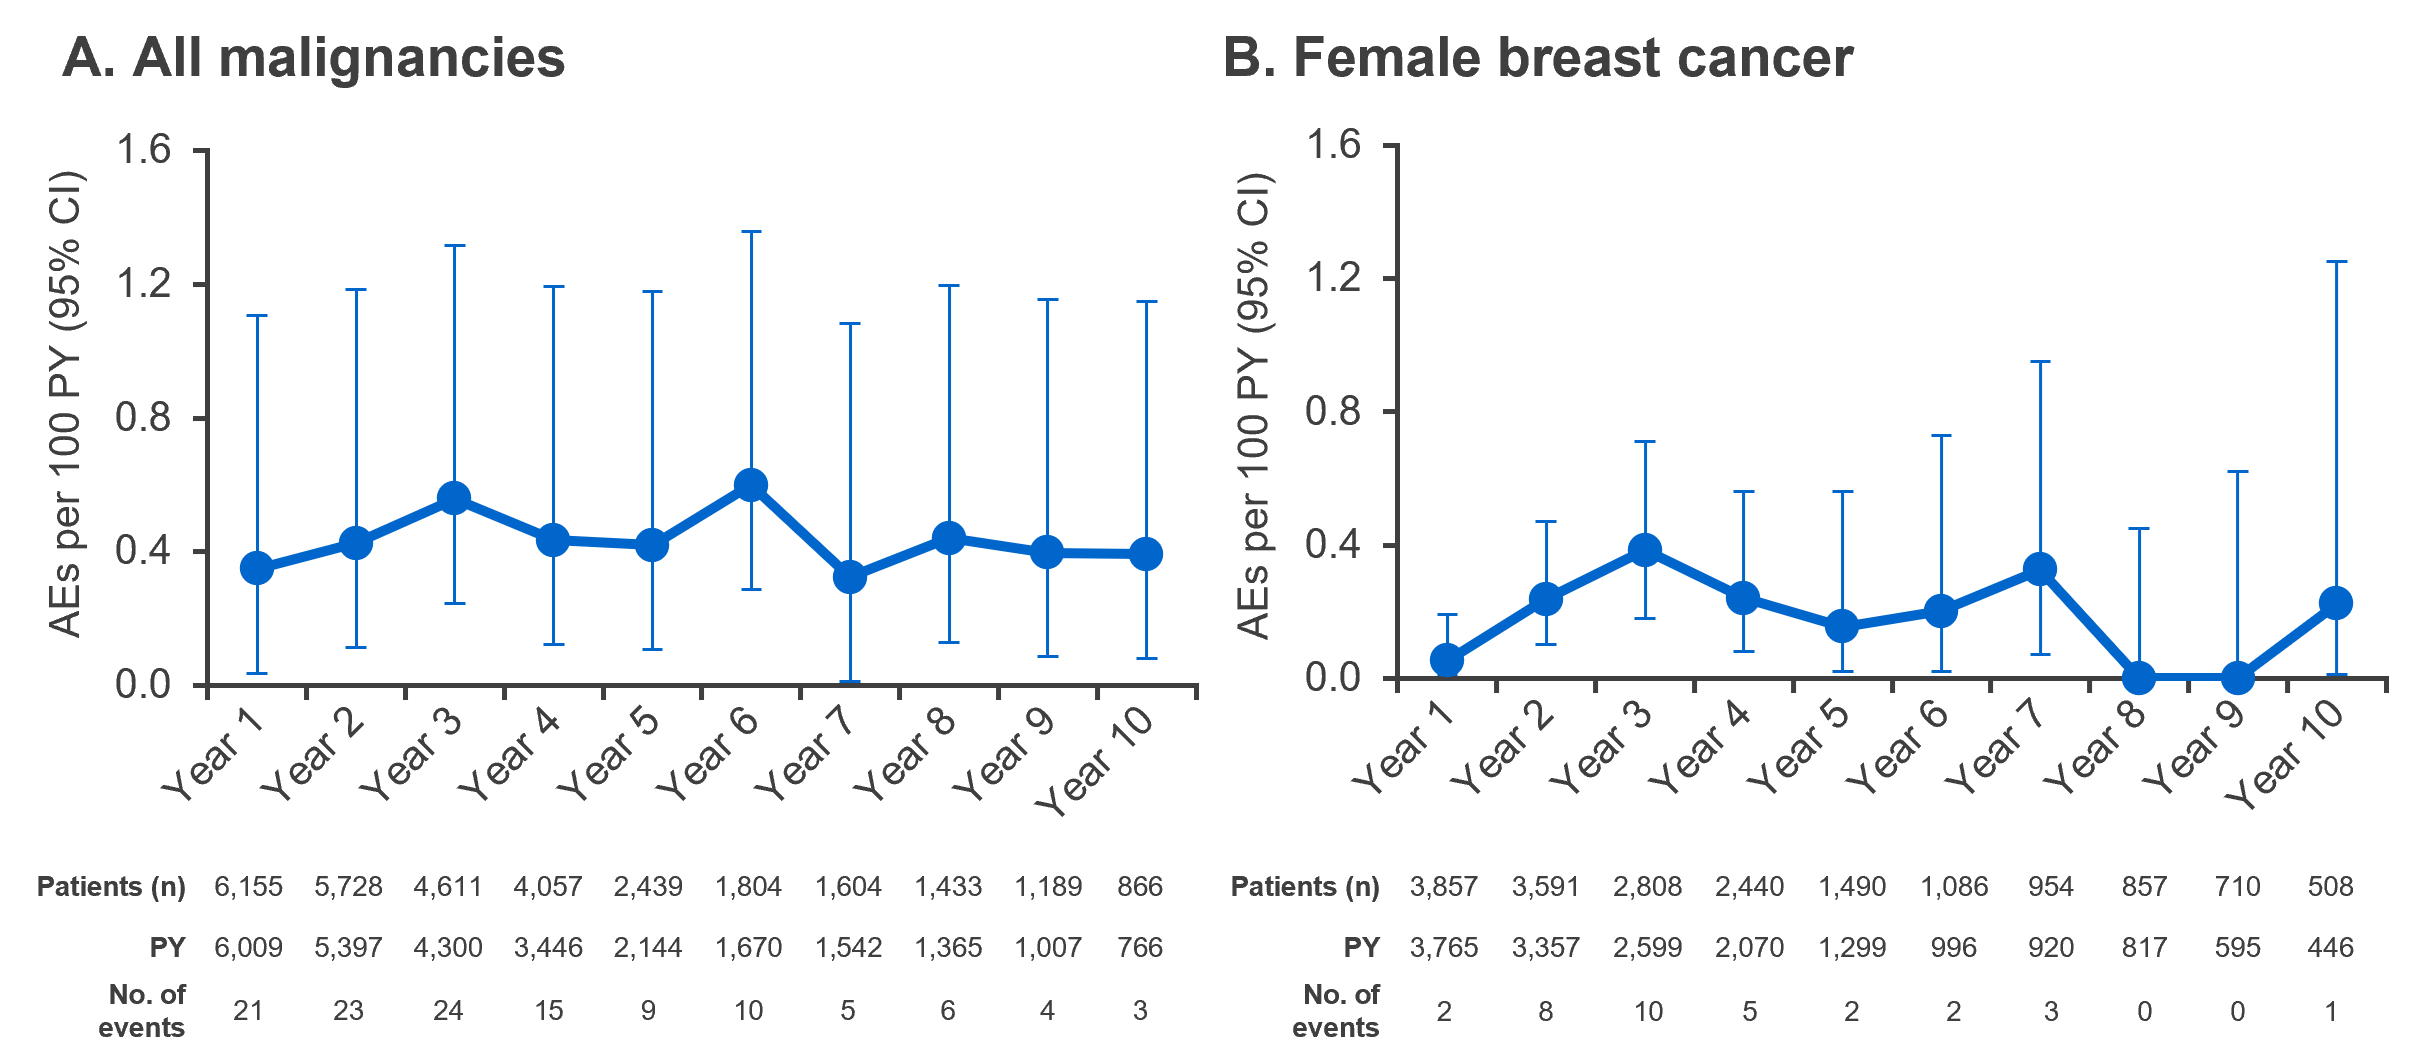  Yearly incidence rates of all malignancies (A) and female breast cancer (B) in the ocrelizumab all-exposure population